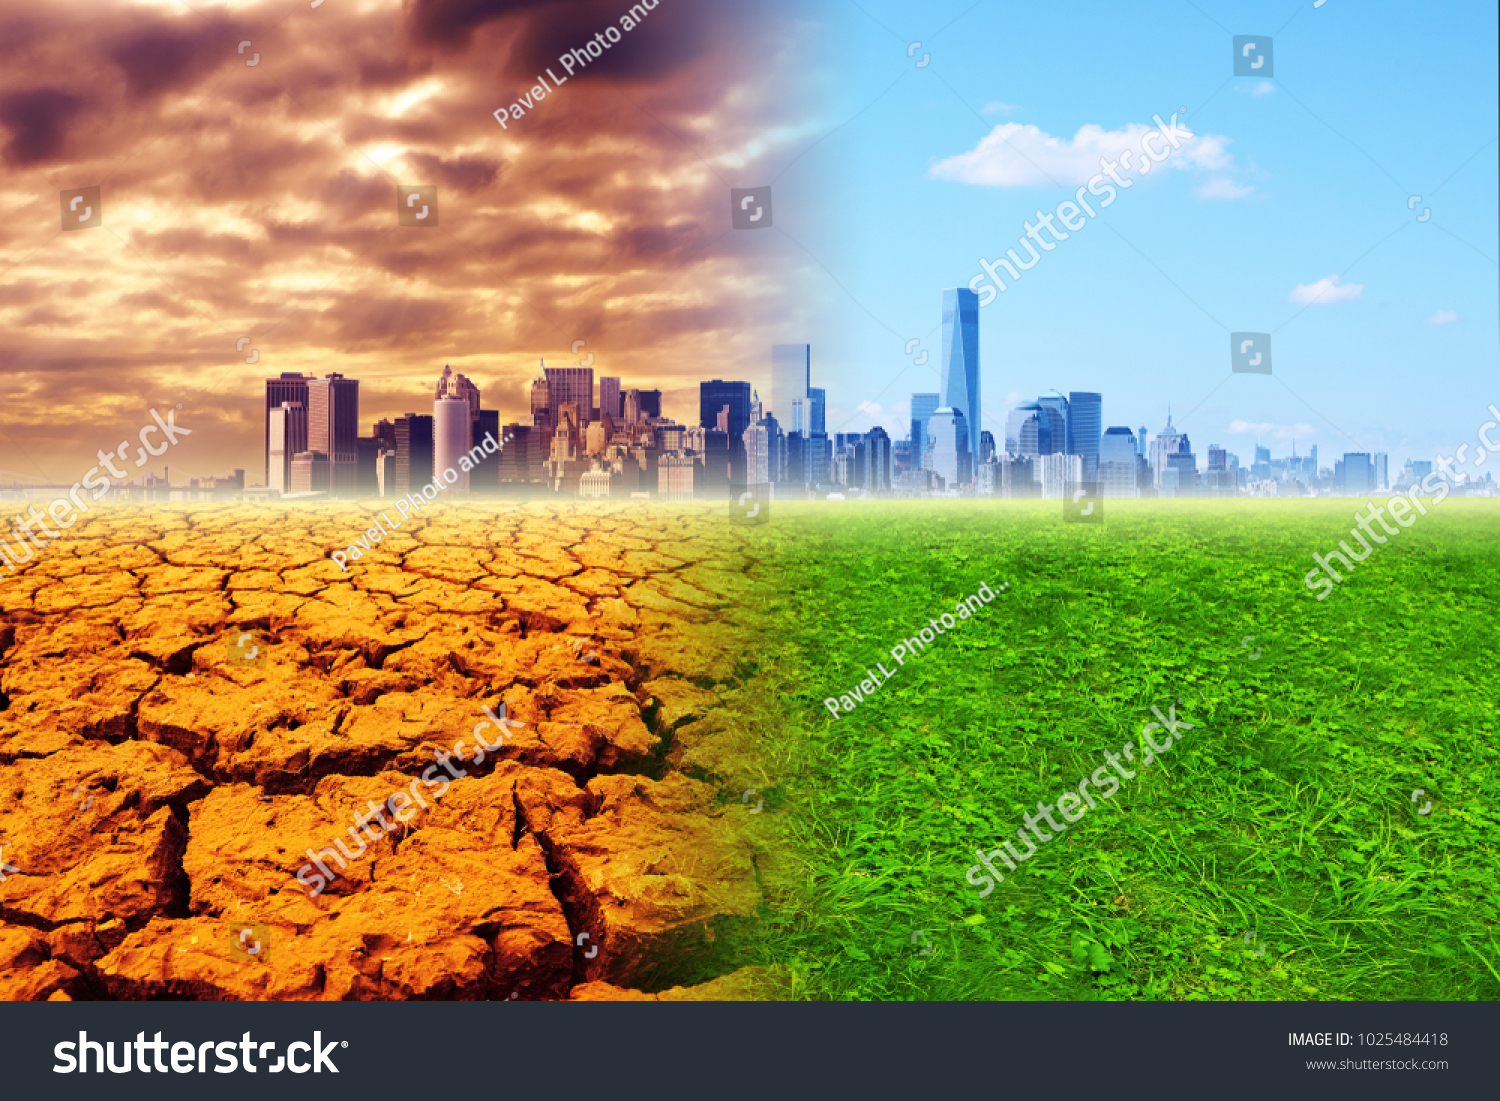 Global warming - the city, barren land and green meadow, collage #1025484418